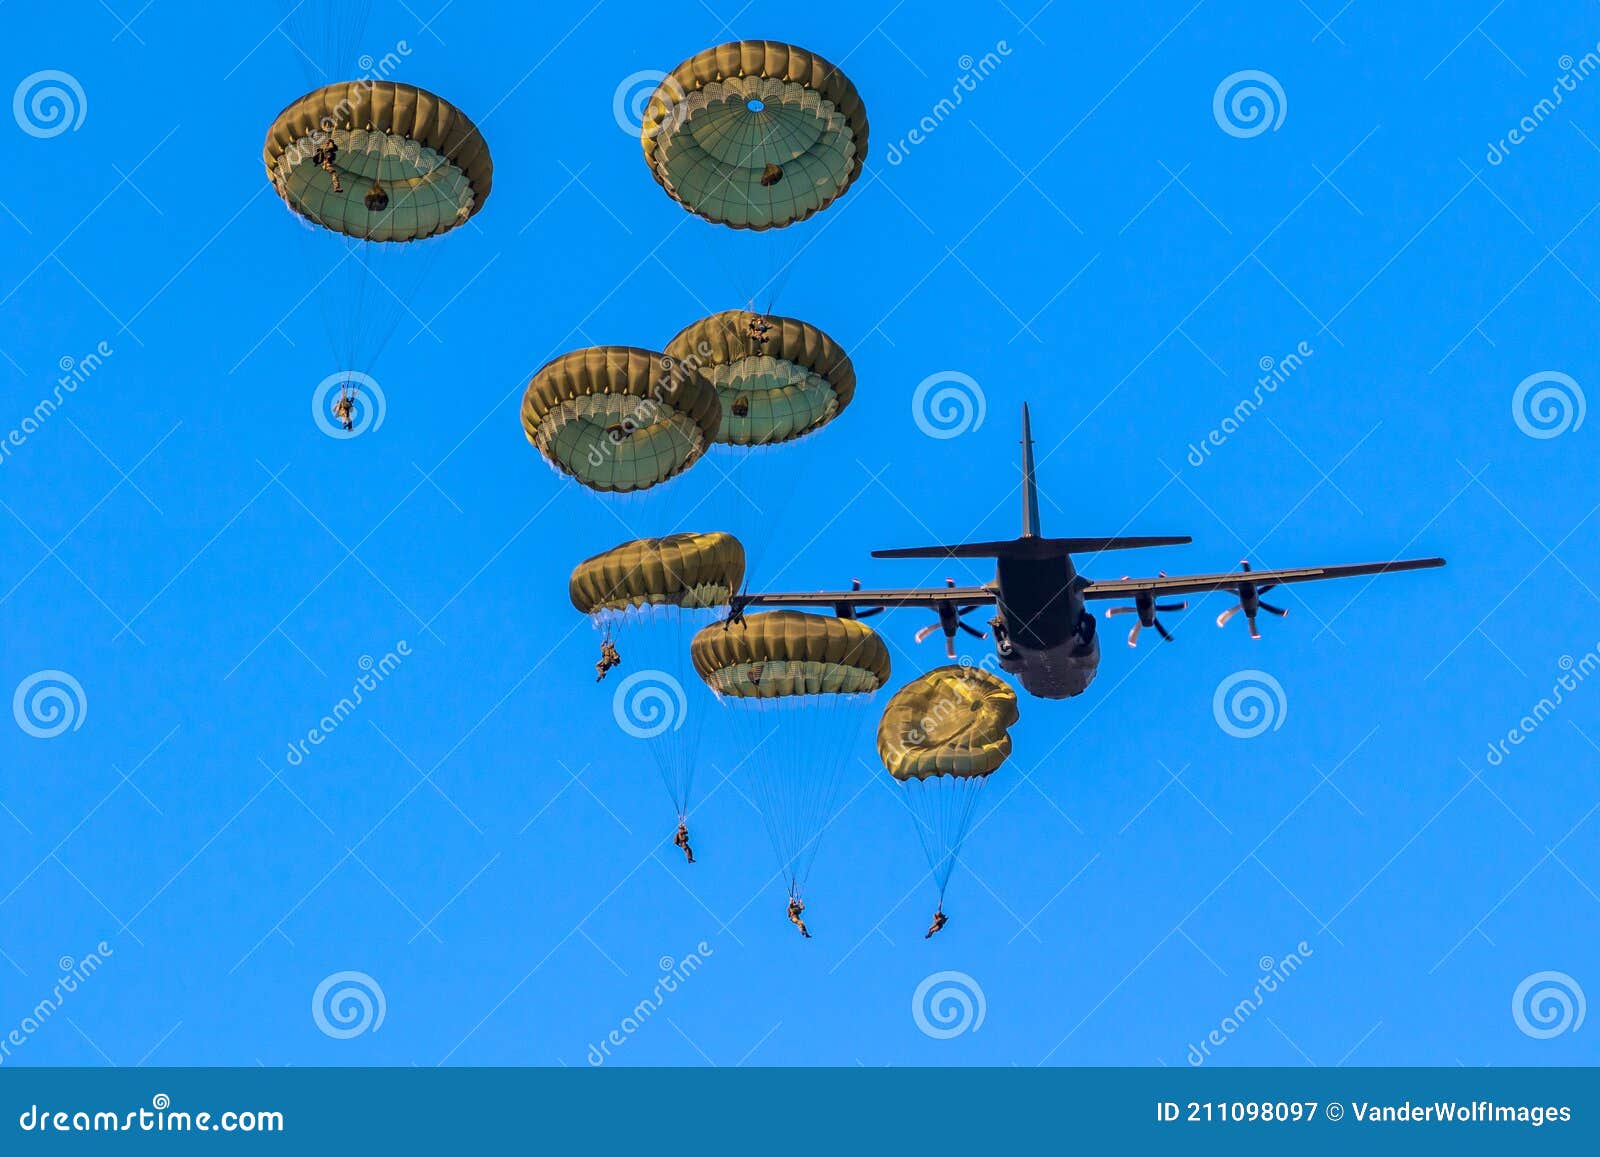 military parachutist paratroopers parachute jumping out of a air force planes on a clear blue sky day